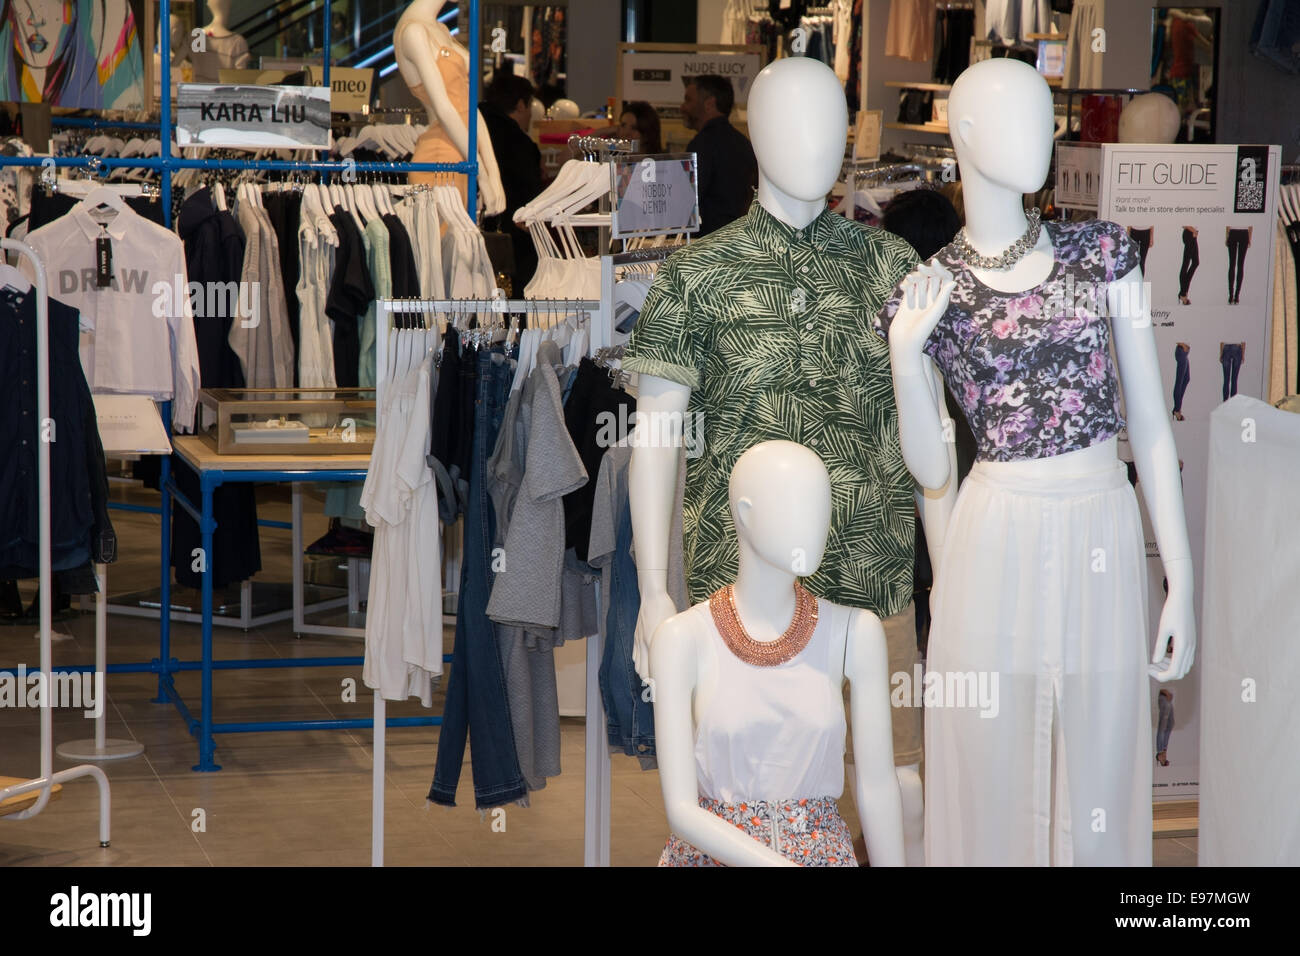 Interesting mannequins in a clothing store Stock Photo by ©vevchic